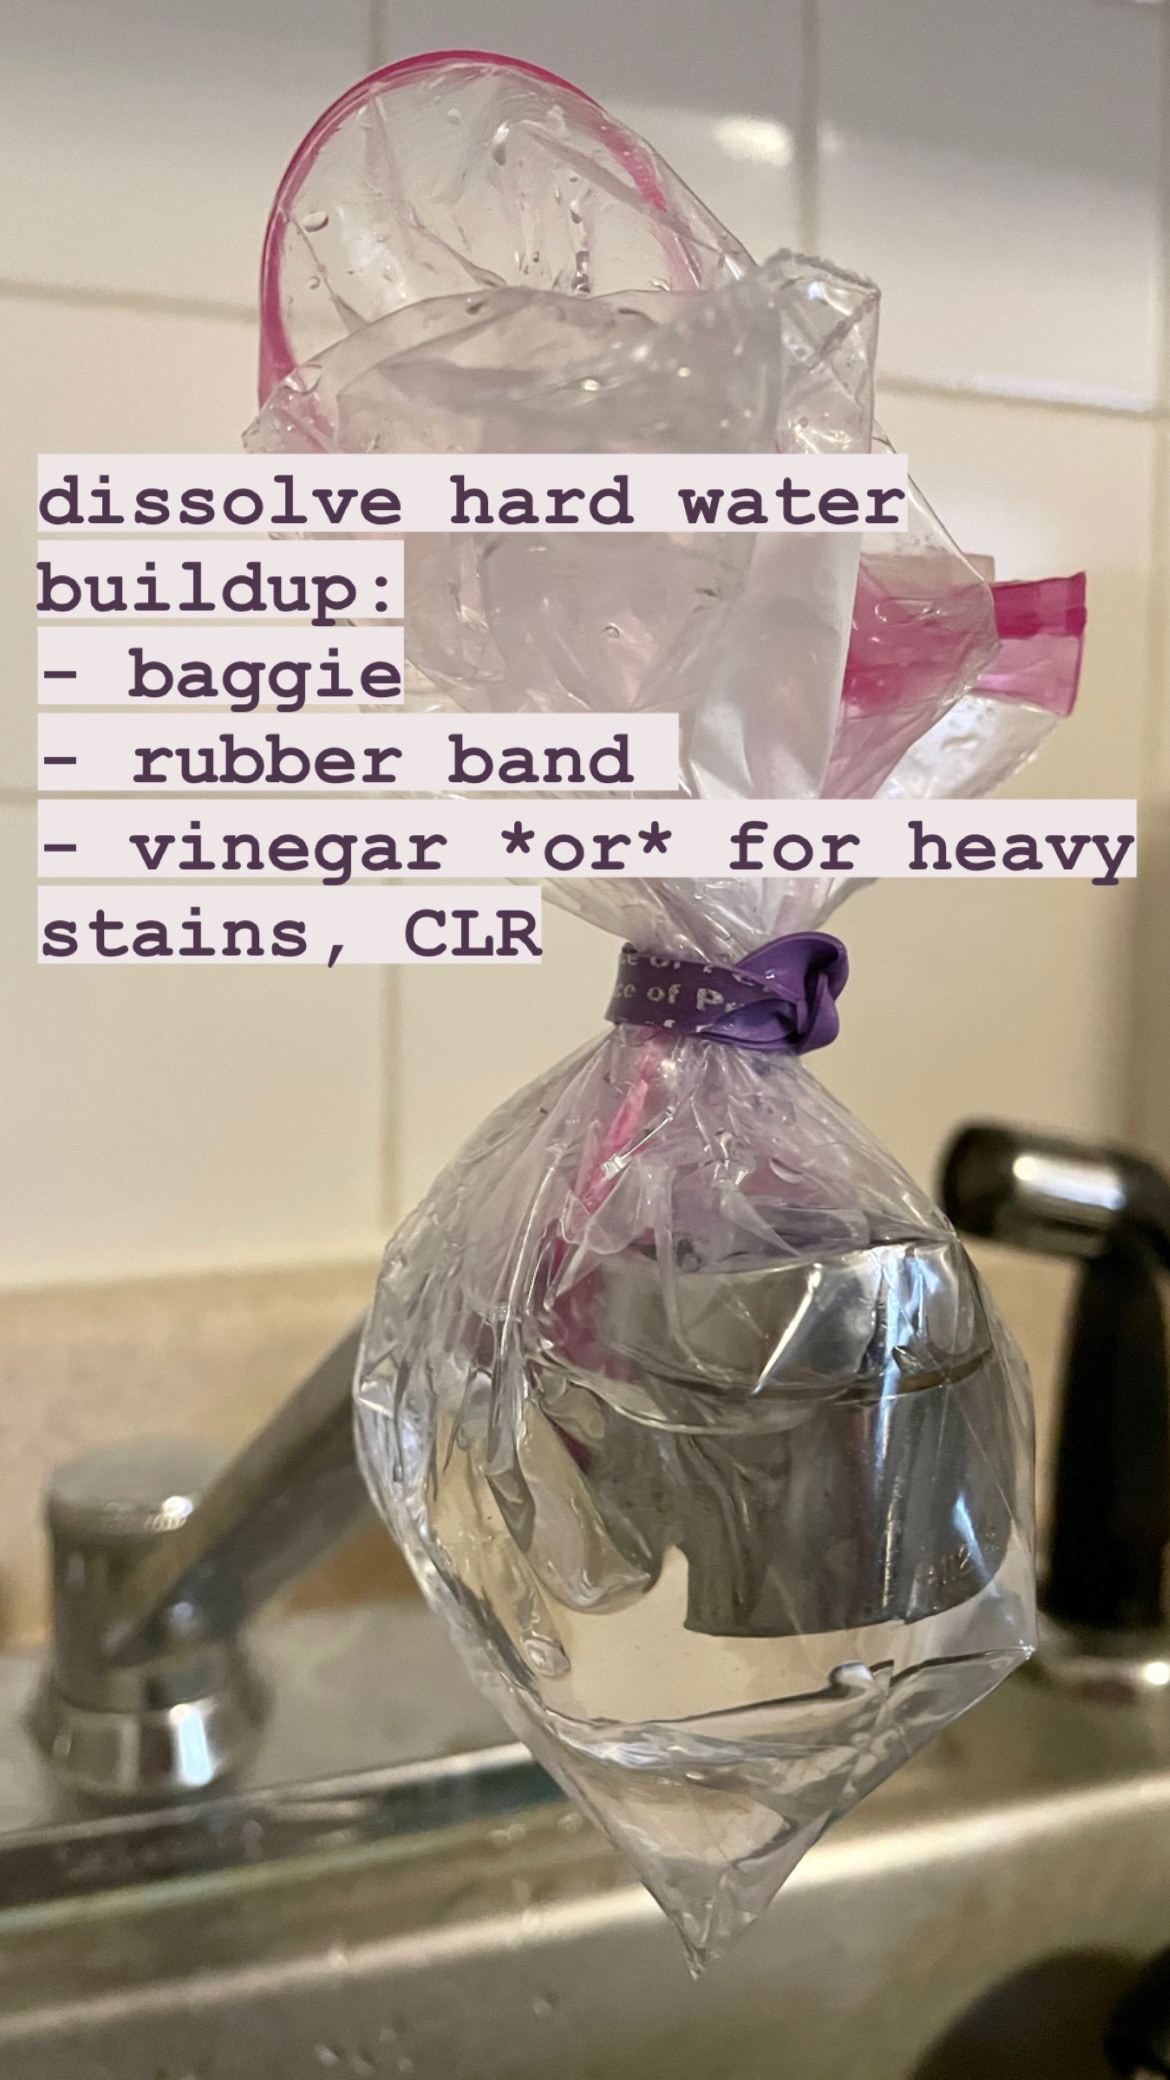 kitchen faucet with plastic bag filled with vinegar rubber-banded over the nozzle